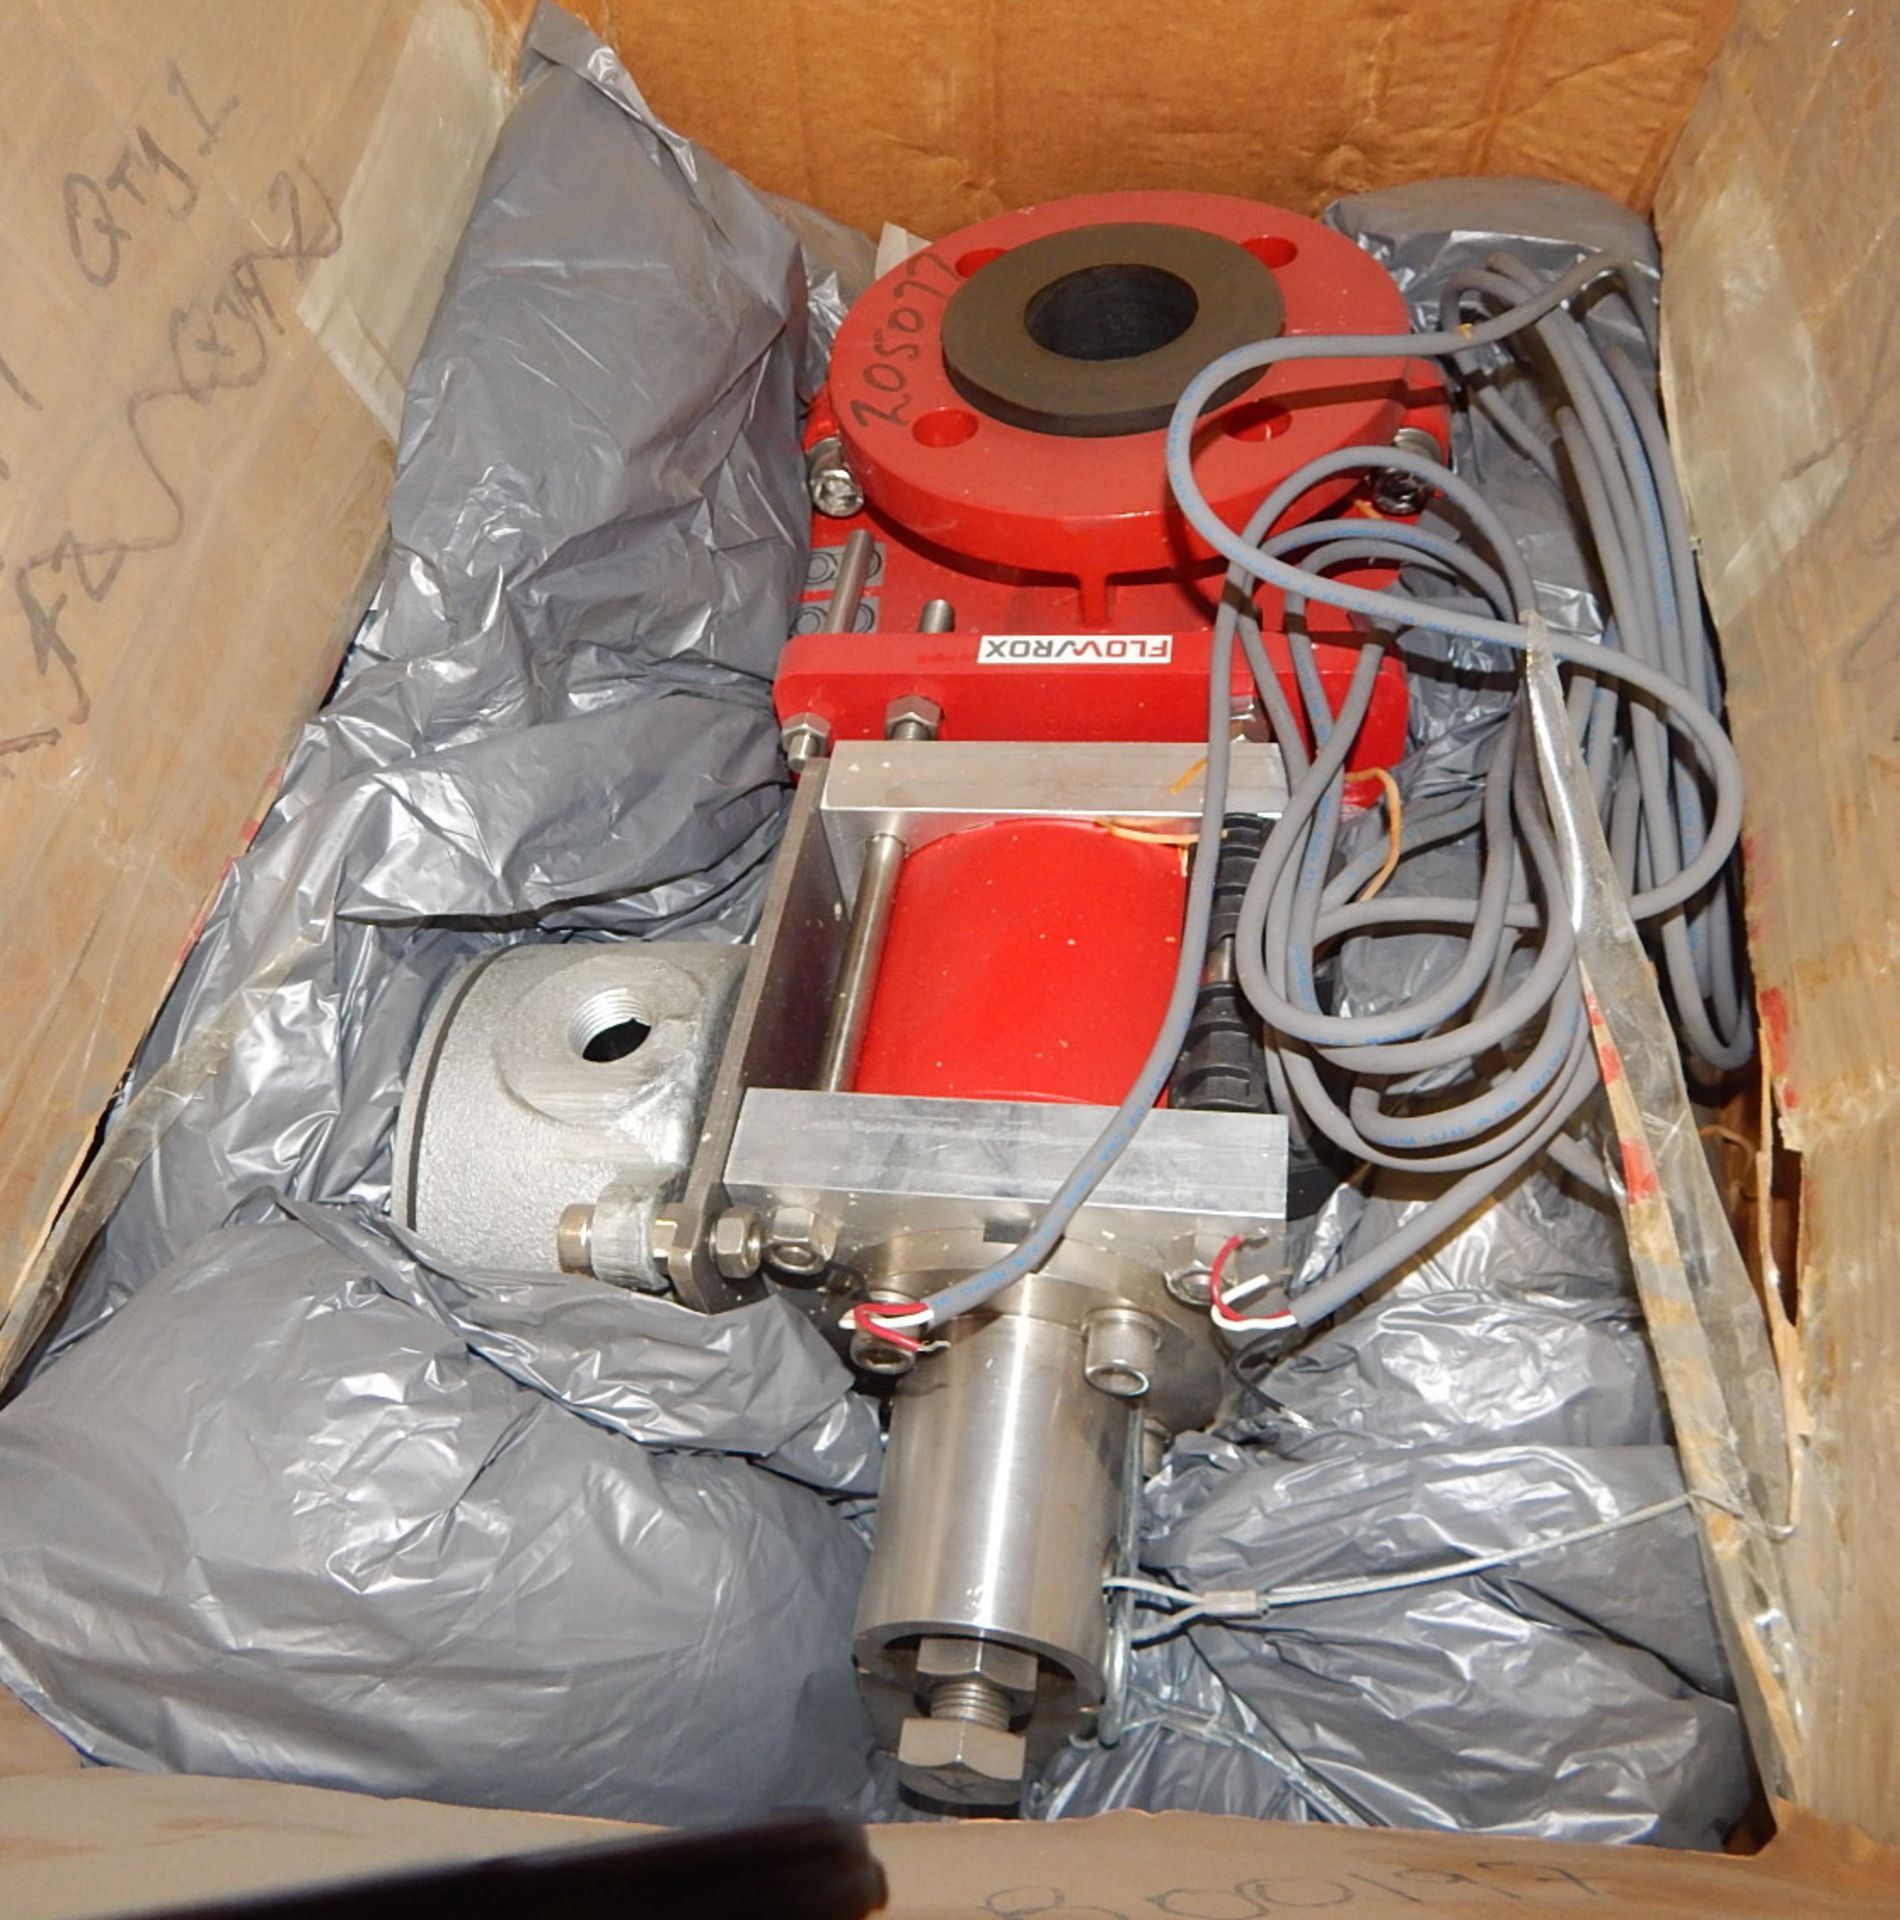 LOT/ 8" FLANGED CONTROL VALVE AND FLOROX CONTROL VALVE (CMD) - Image 3 of 5